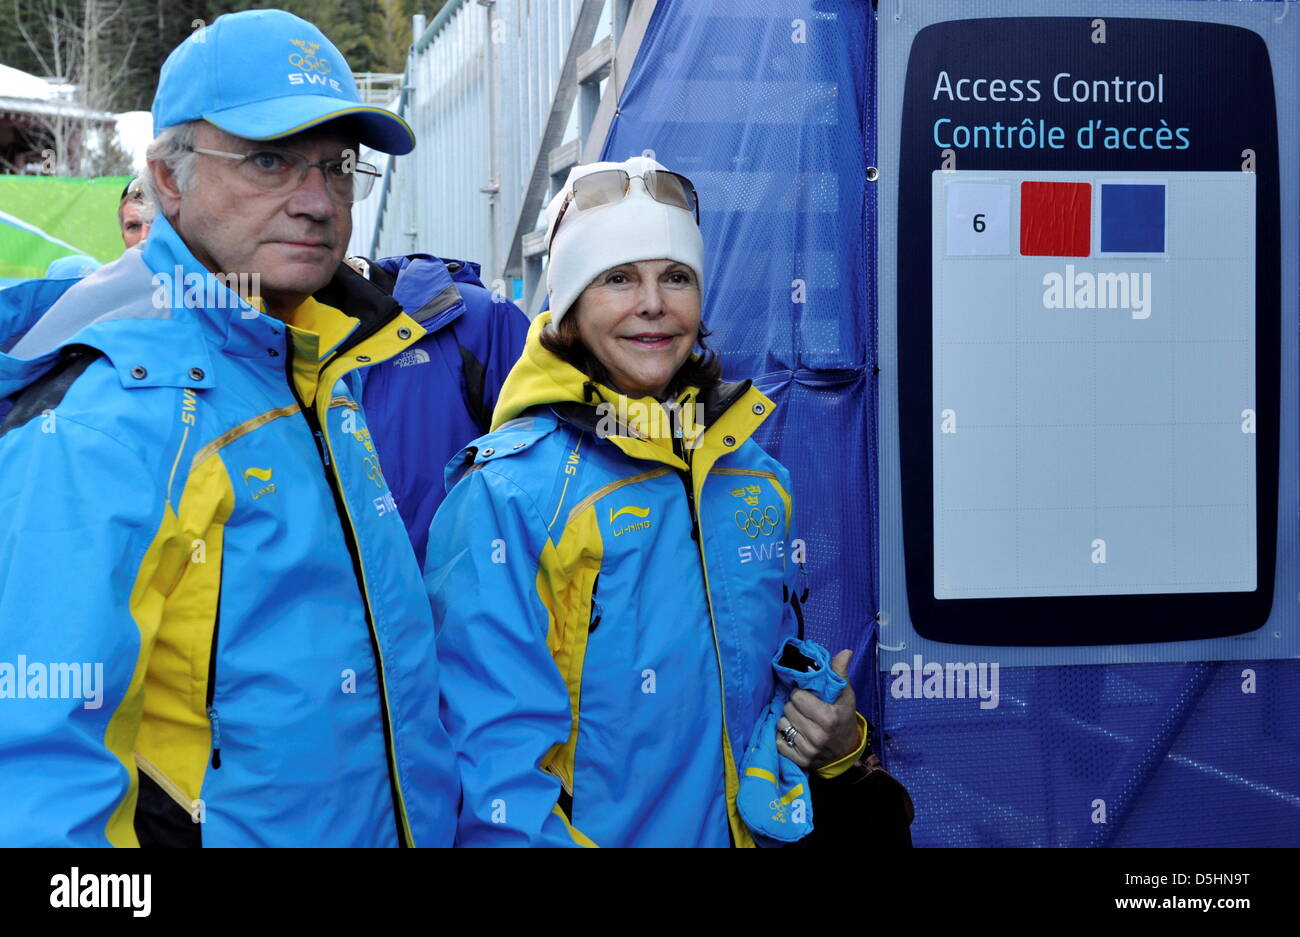 King of Sweden Carl Gustav and Queen Sylvia visit Ladie's alpine Super-G competition of the Olympic Winter Games at Whistler Creeksite, Whistler, Canada, 20 February 2010. Photo: Peter Kneffel dpa  +++(c) dpa - Bildfunk+++ Stock Photo